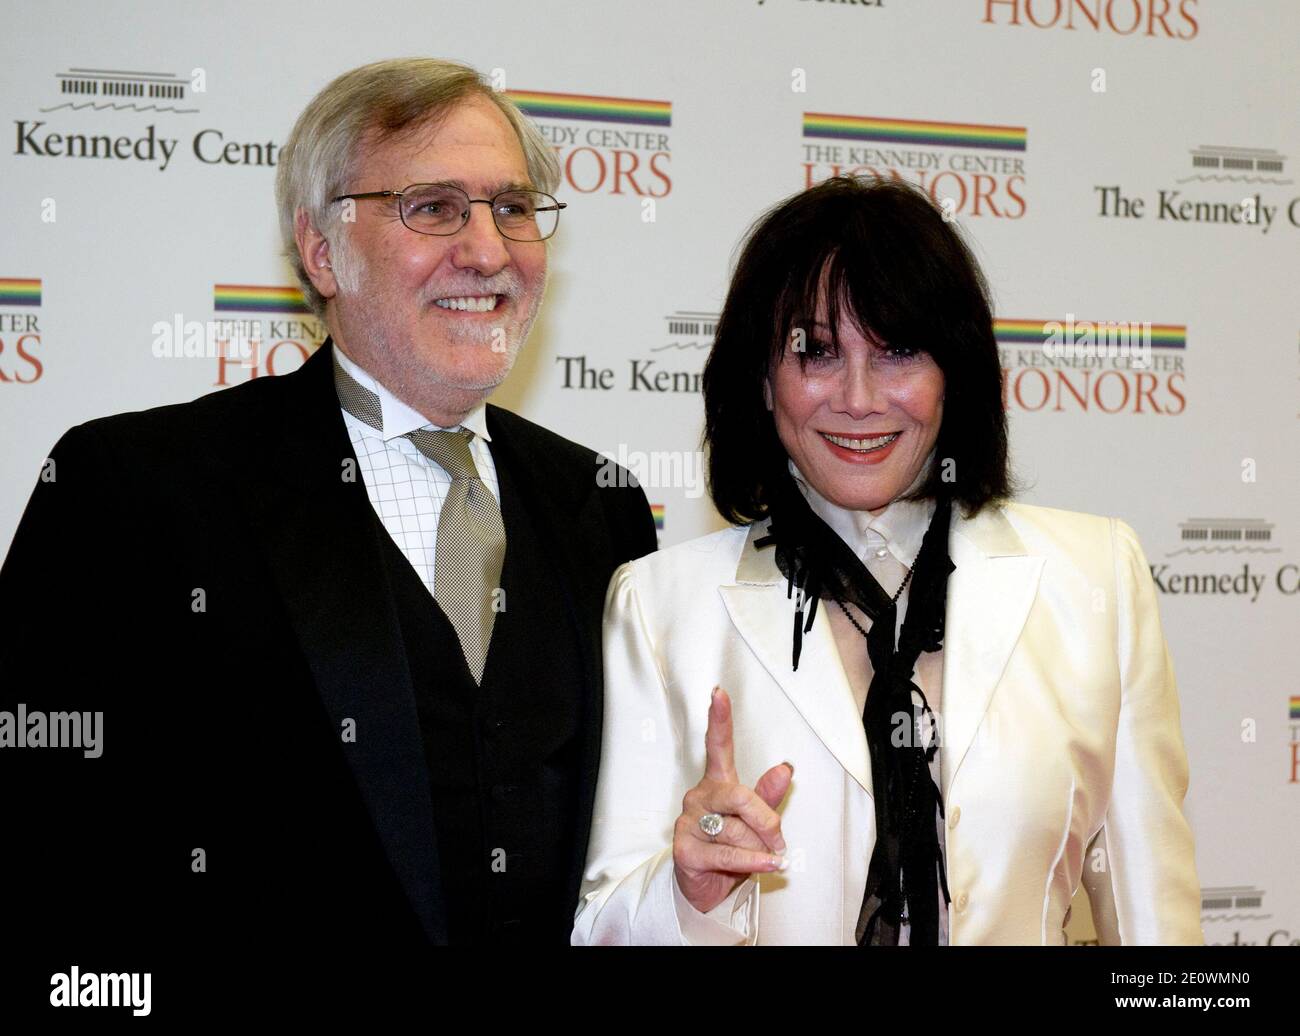 Michele Lee and Fred Rappoport arrive for the formal Artist's Dinner honoring the recipients of the 2012 Kennedy Center Honors hosted by United States Secretary of State Hillary Rodham Clinton at the U.S. Department of State in Washington, DC, USA, on December 01, 2012. The 2012 honorees are Buddy Guy, actor Dustin Hoffman, late-night host David Letterman, dancer Natalia Makarova, and the British rock band Led Zeppelin. Photo by Ron Sachs/ABACAPRESS.COM Stock Photo